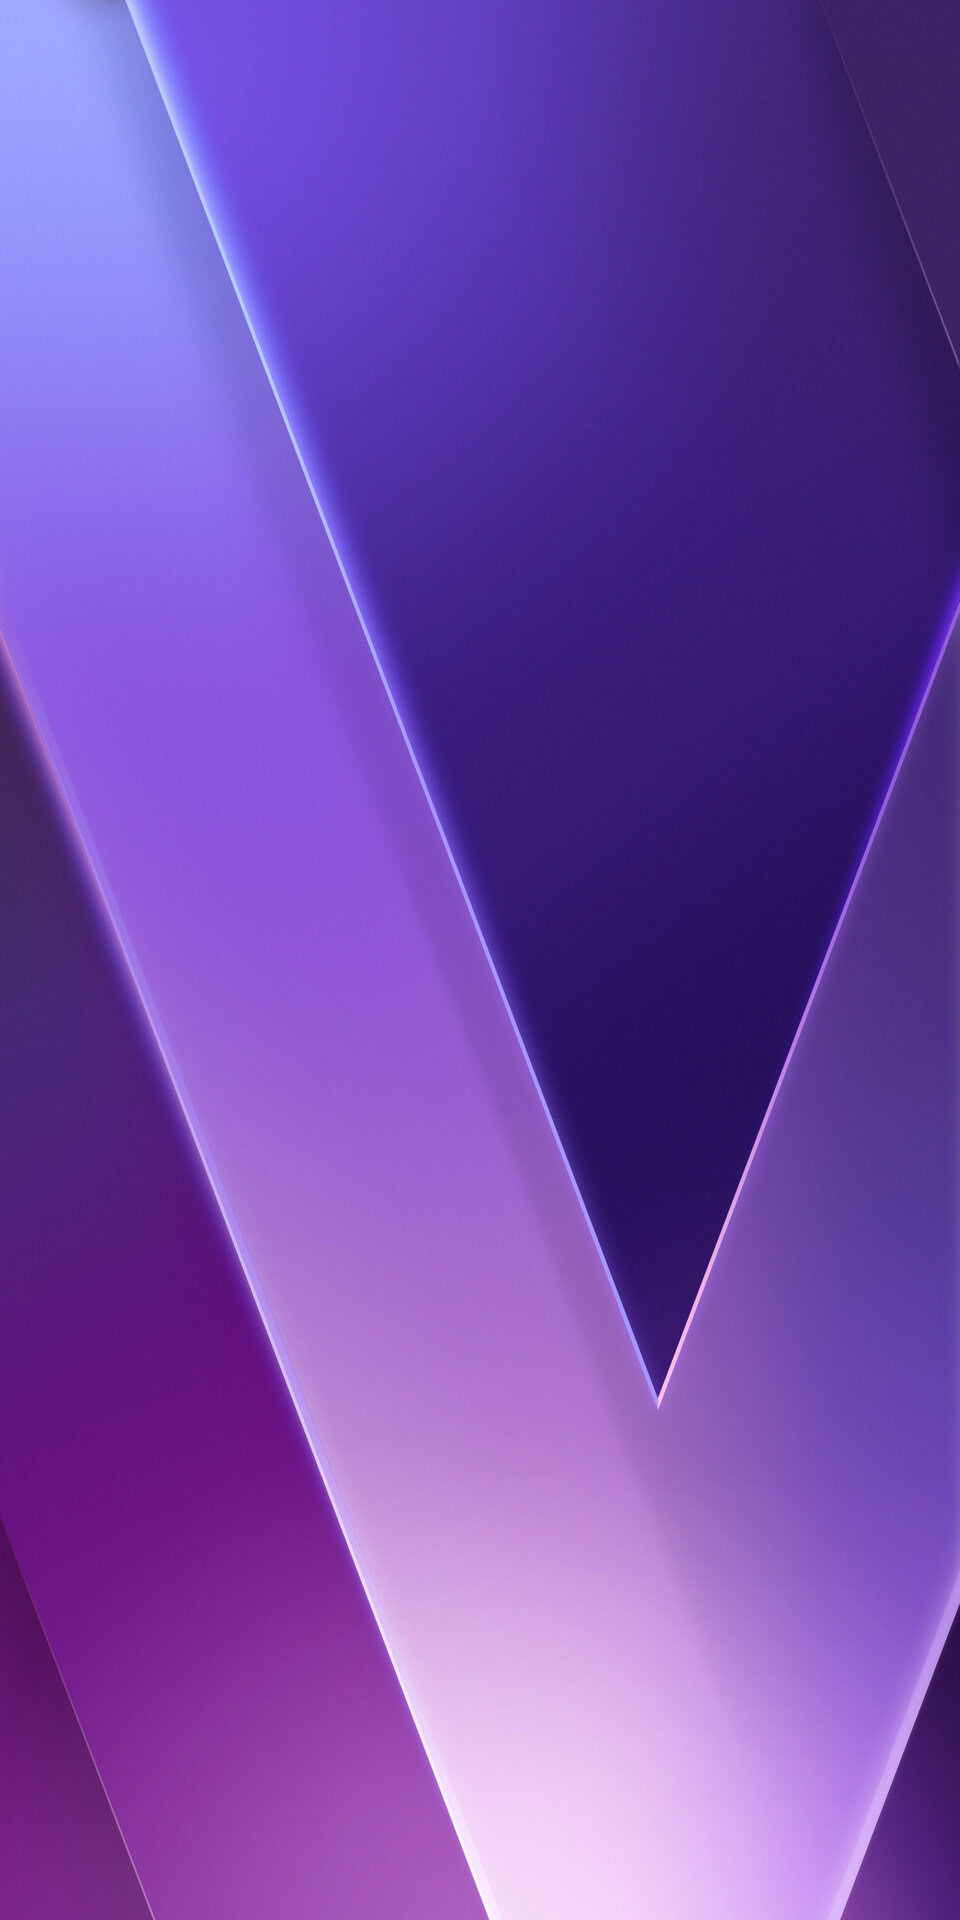 LG V30 wallpapers: download all of them right here